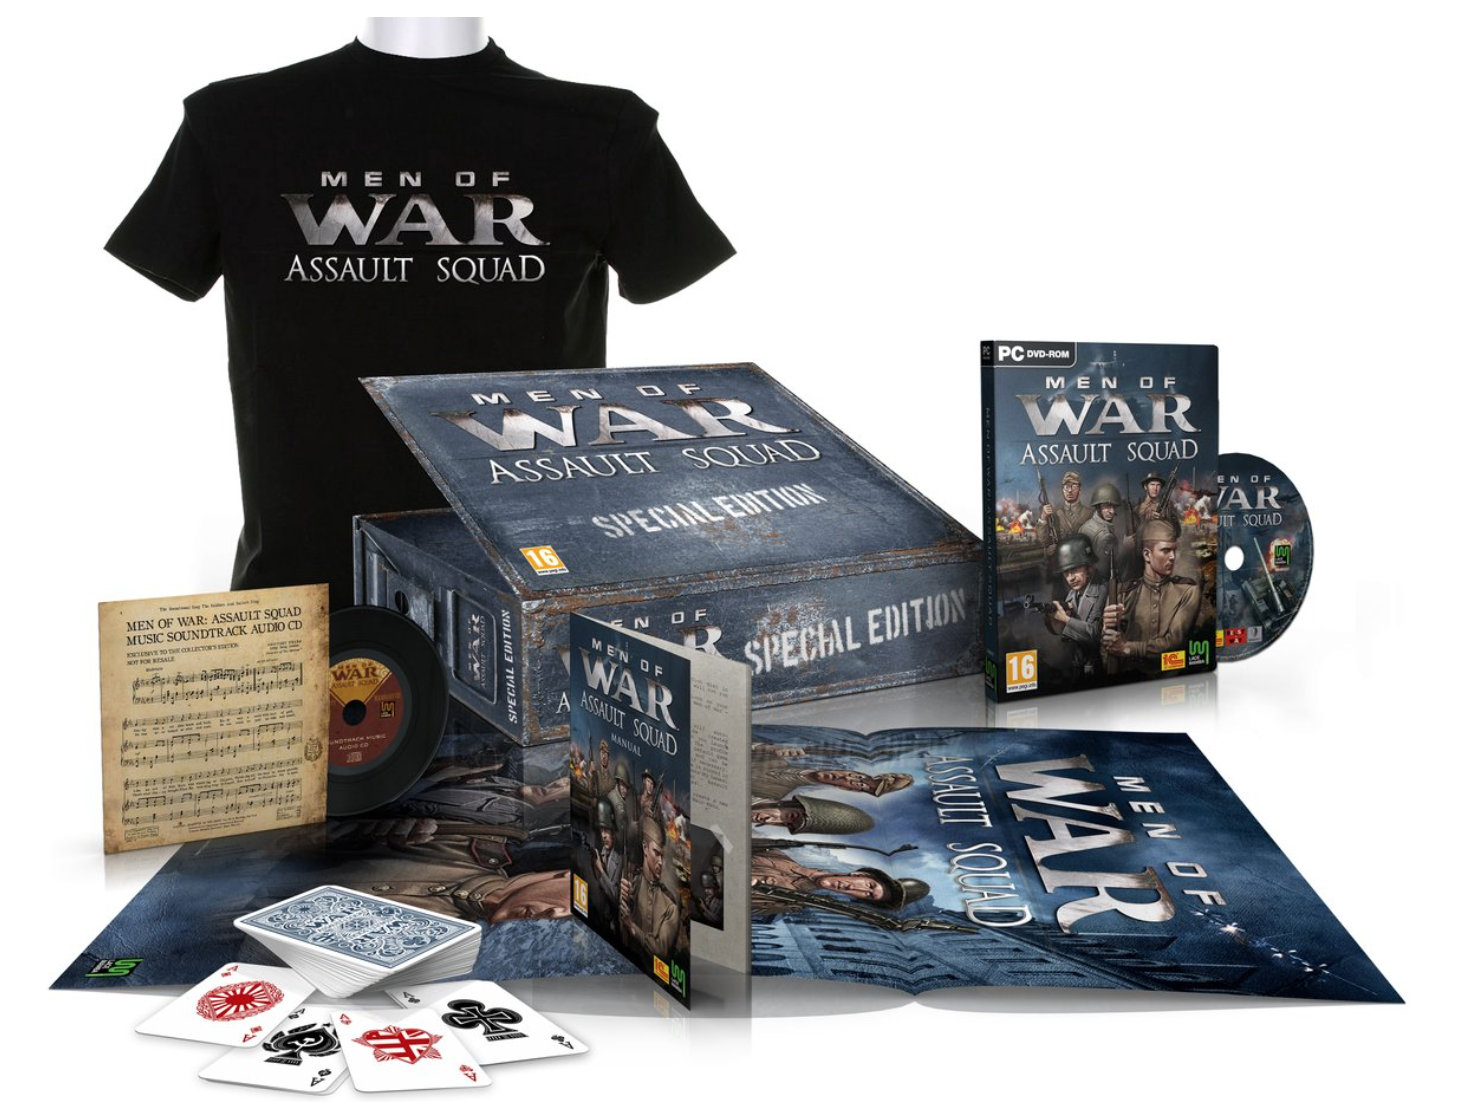 Men of War: Assault Squad Limited Edition (PC), Lace Mamba